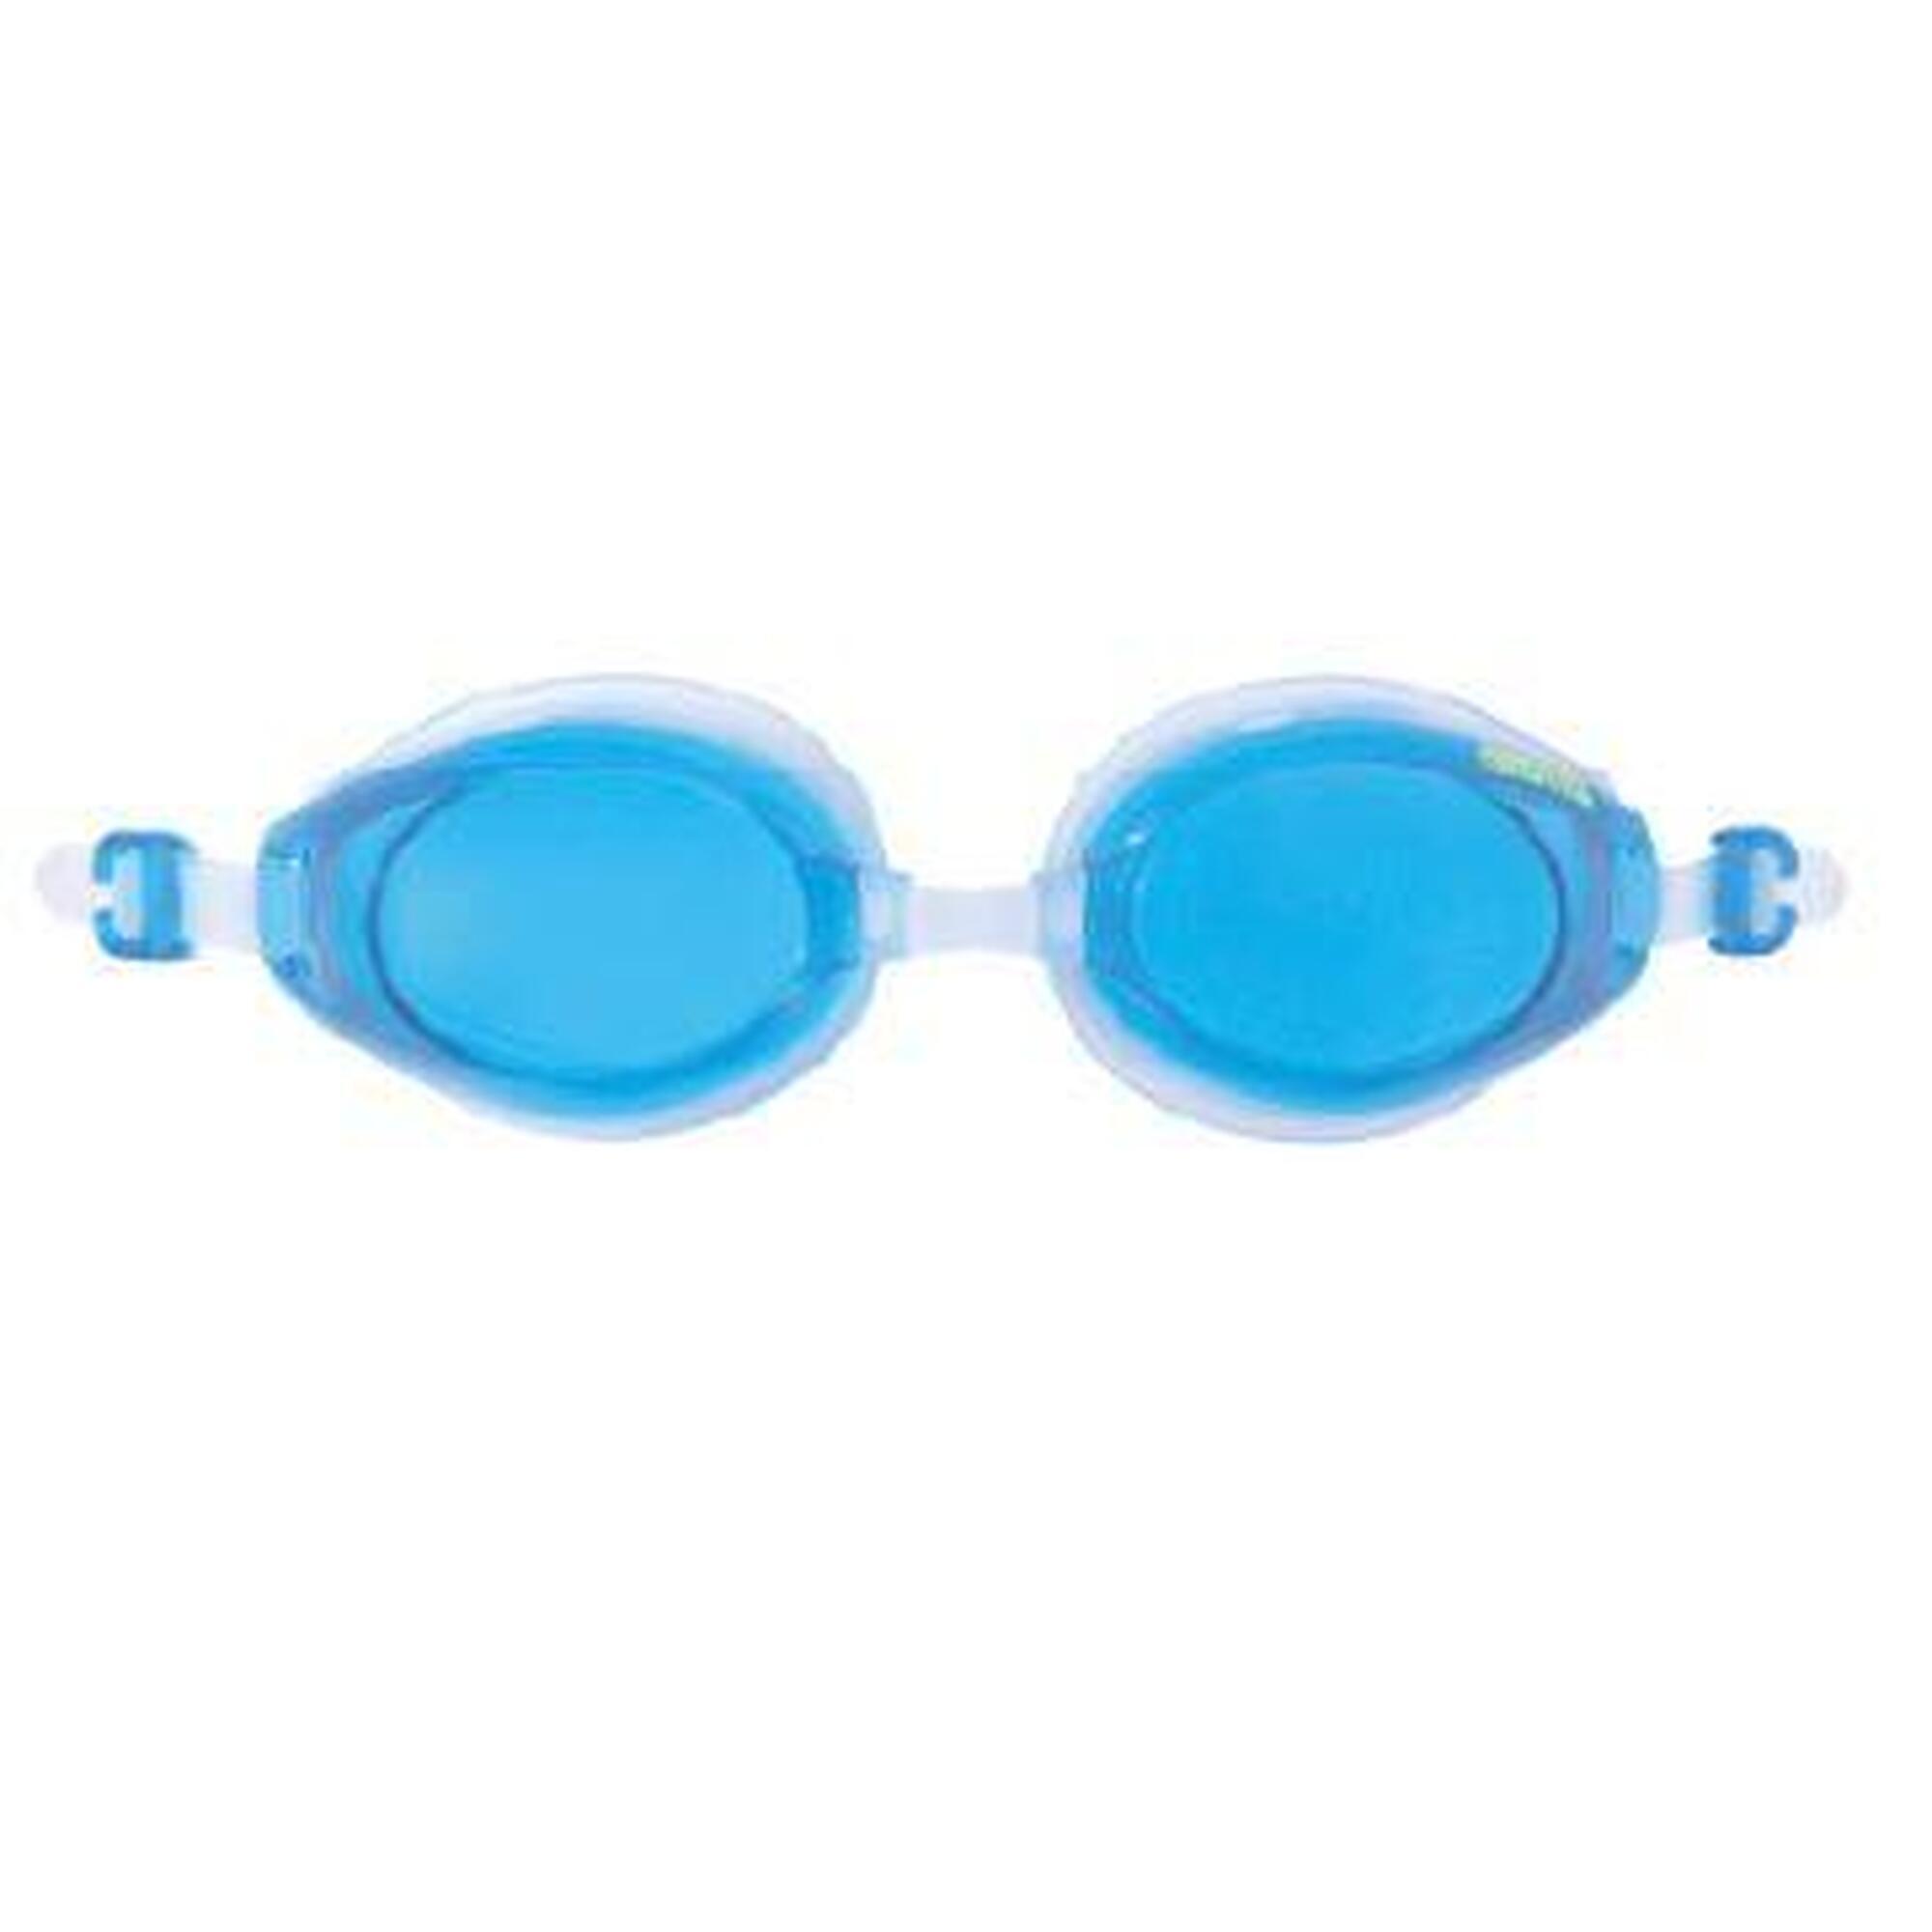 JAPAN MADE WIDE VISION GOGGLE - BLUE